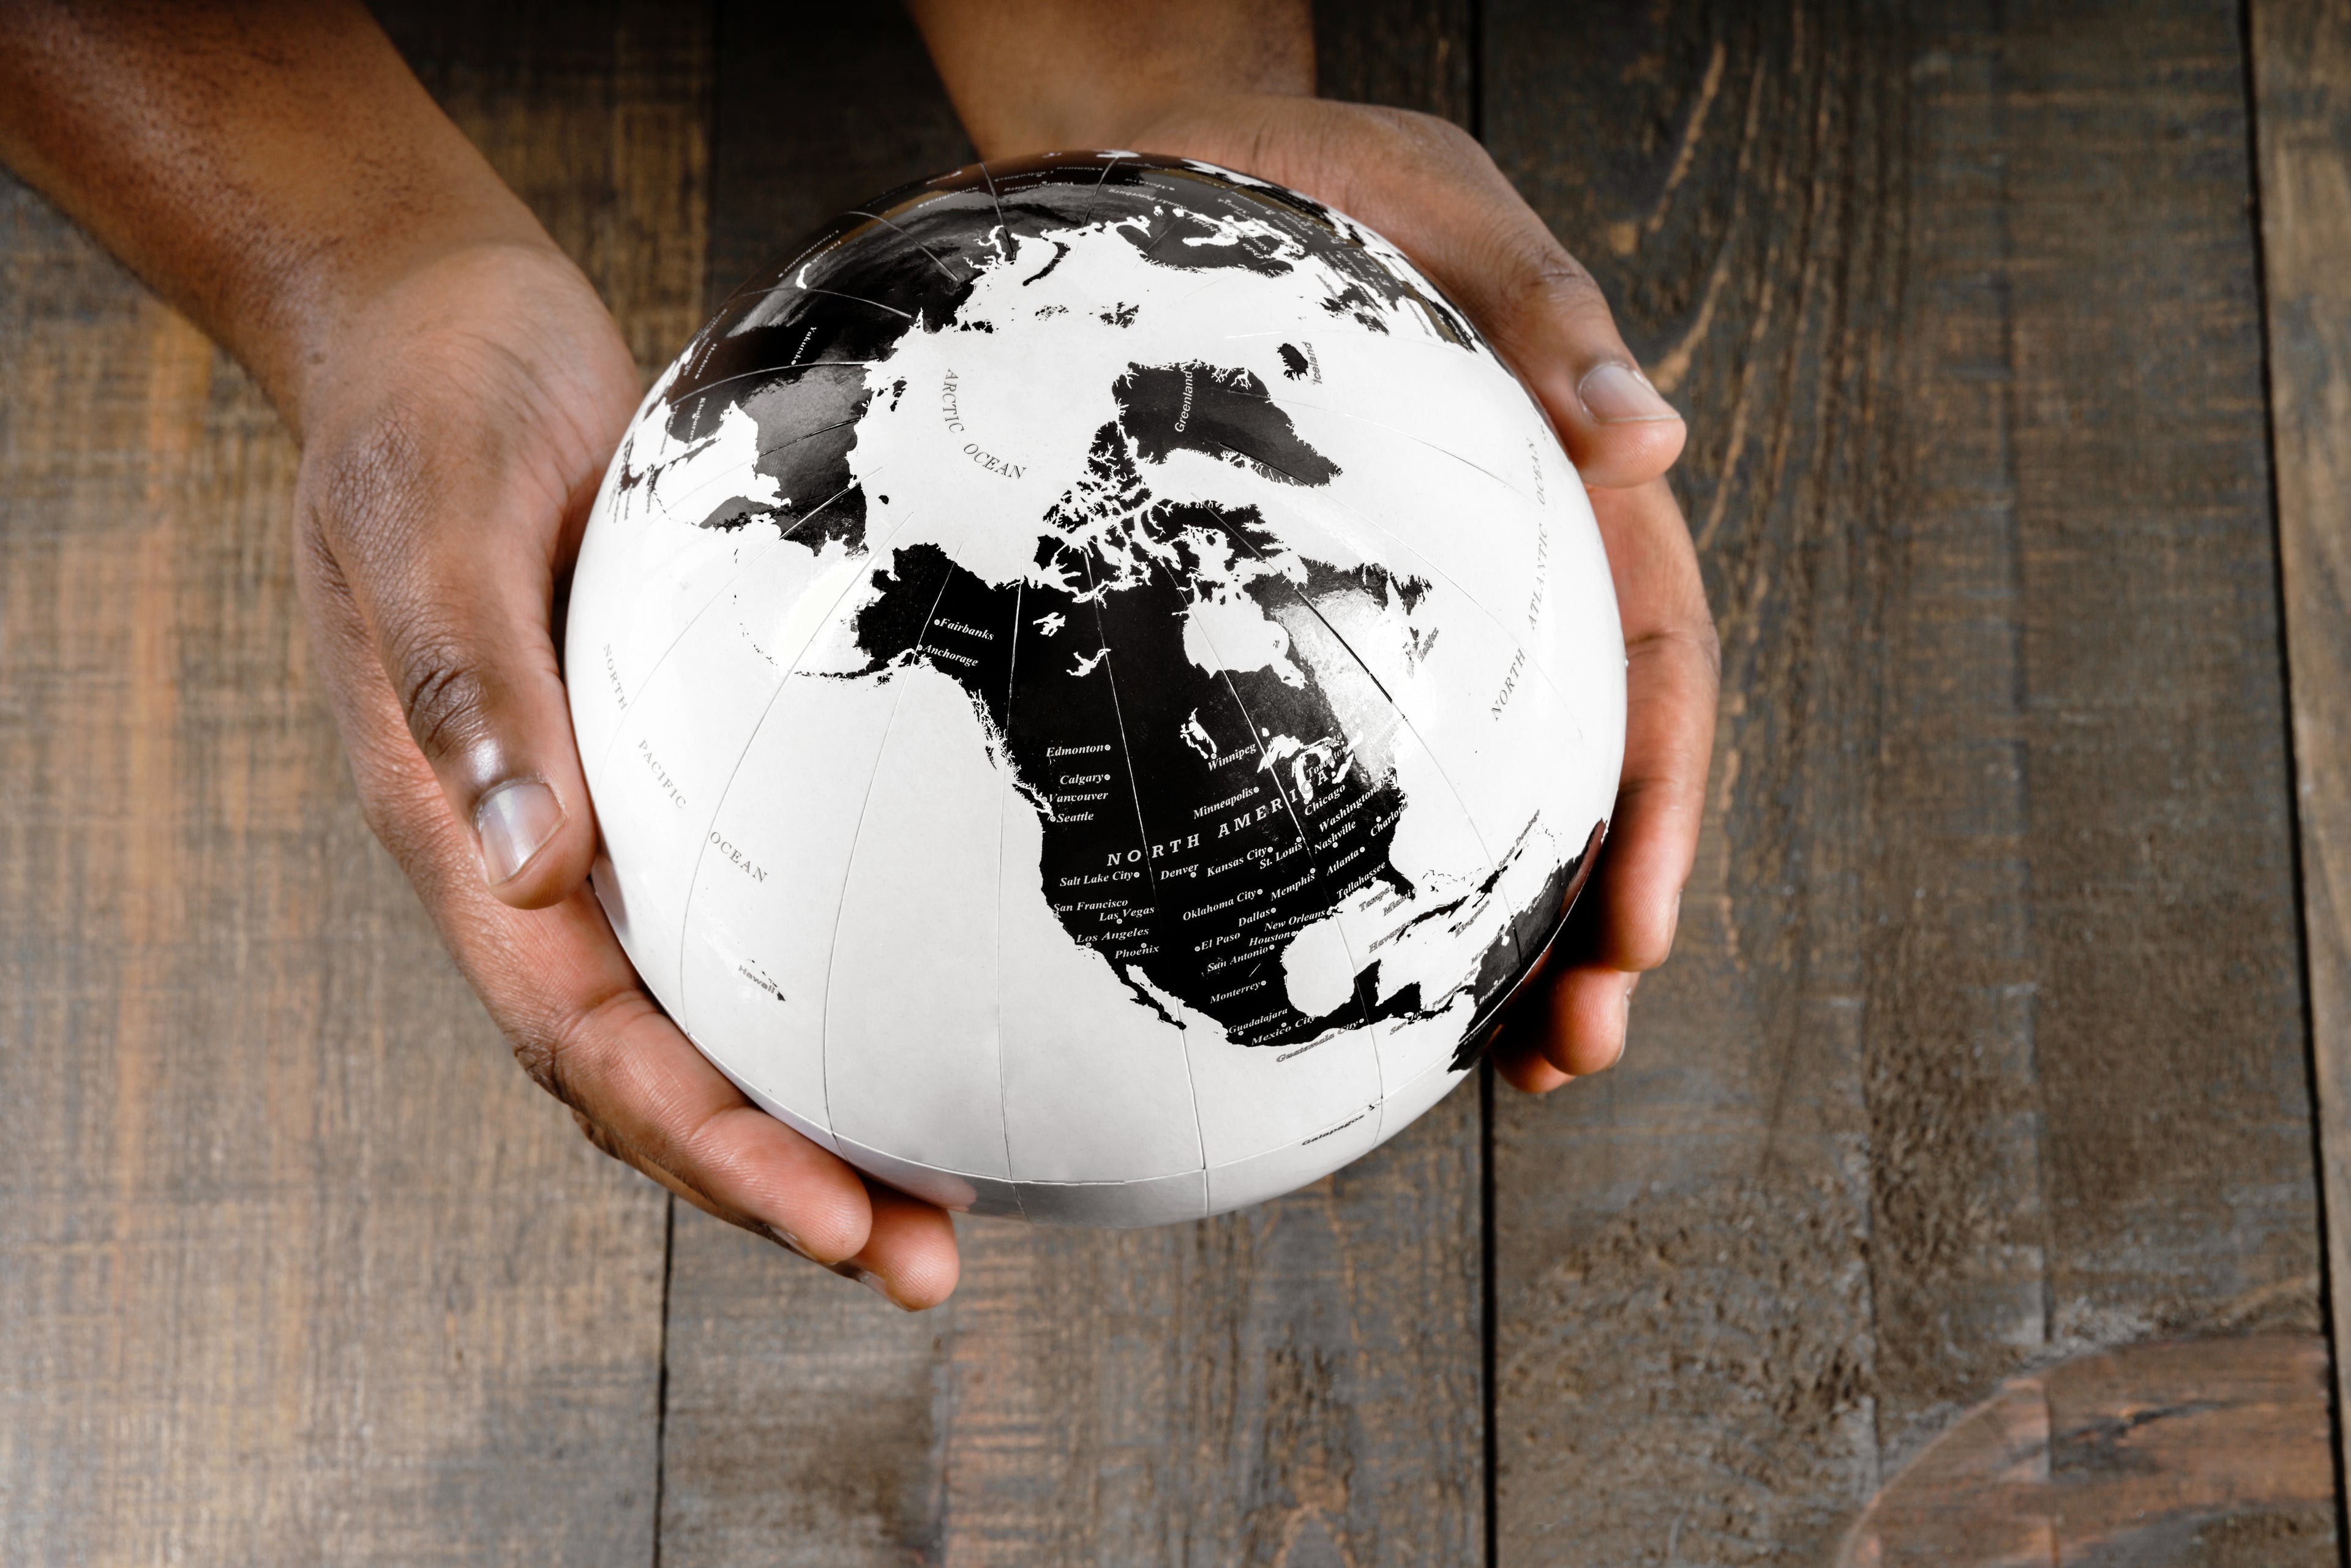 2 hands holding a black and white globe focused on North America or Turtle Island